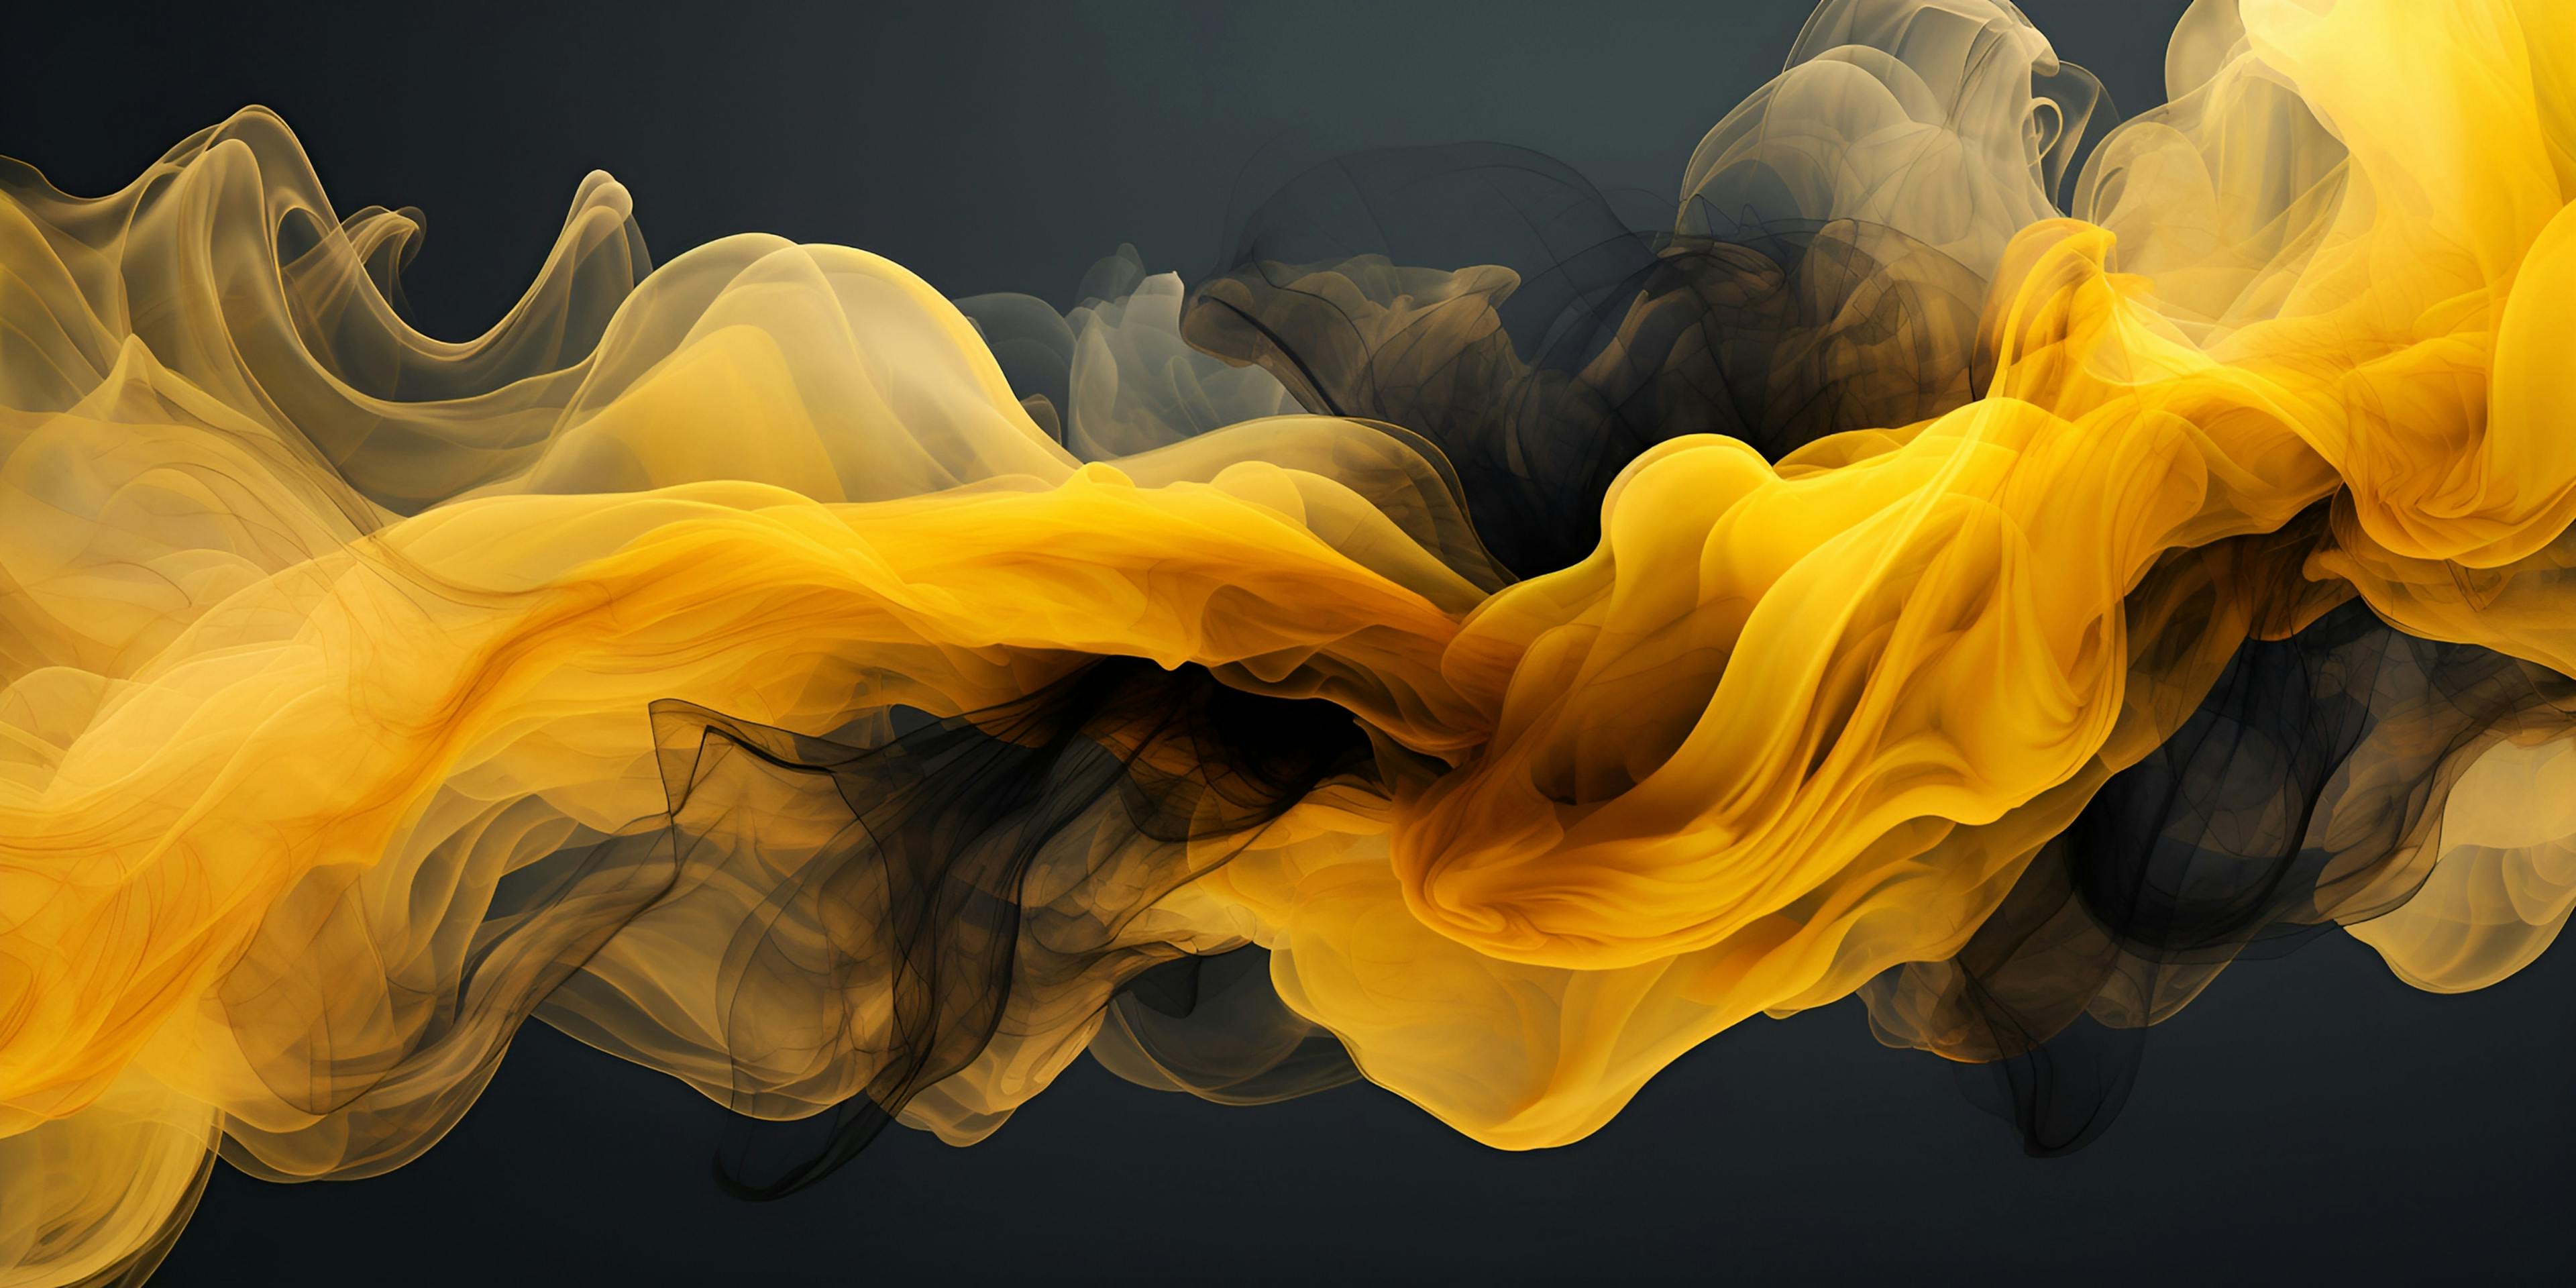 mustard color smoke background surrounded by black waves, in creative abstraction style | Image Credit: © ergapamungkas - stock.adobe.com